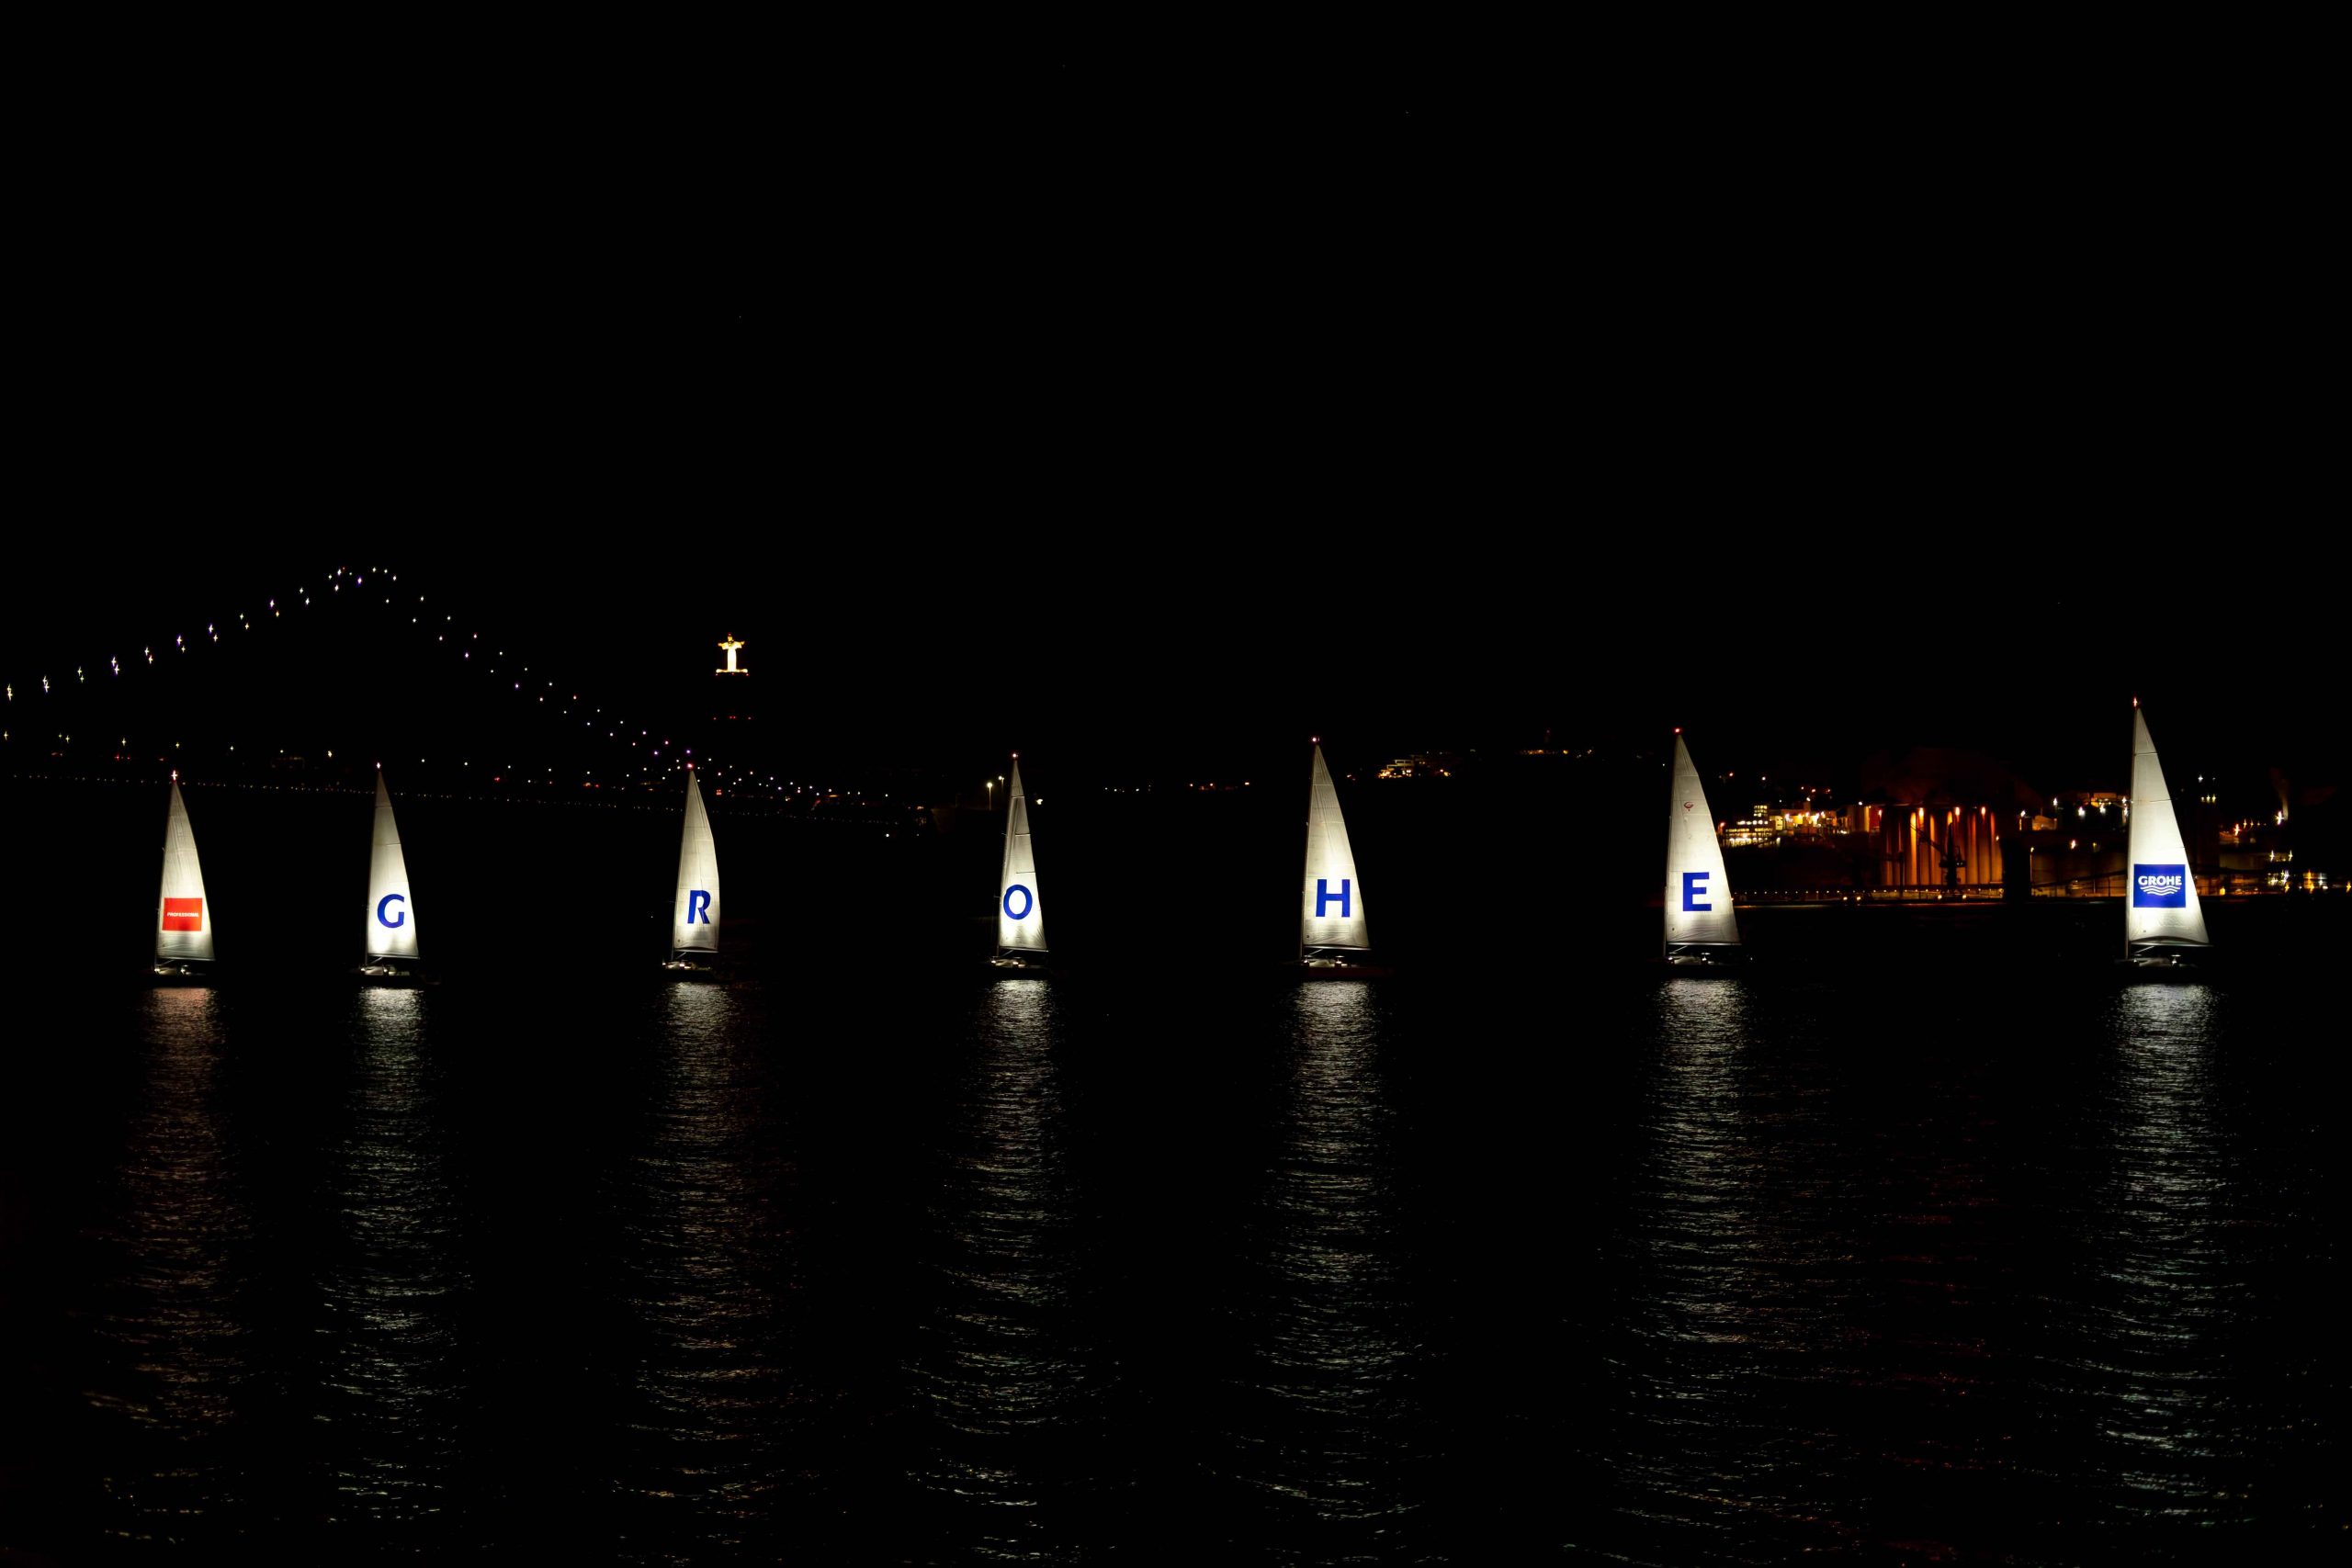 Promotional show on the river tejo